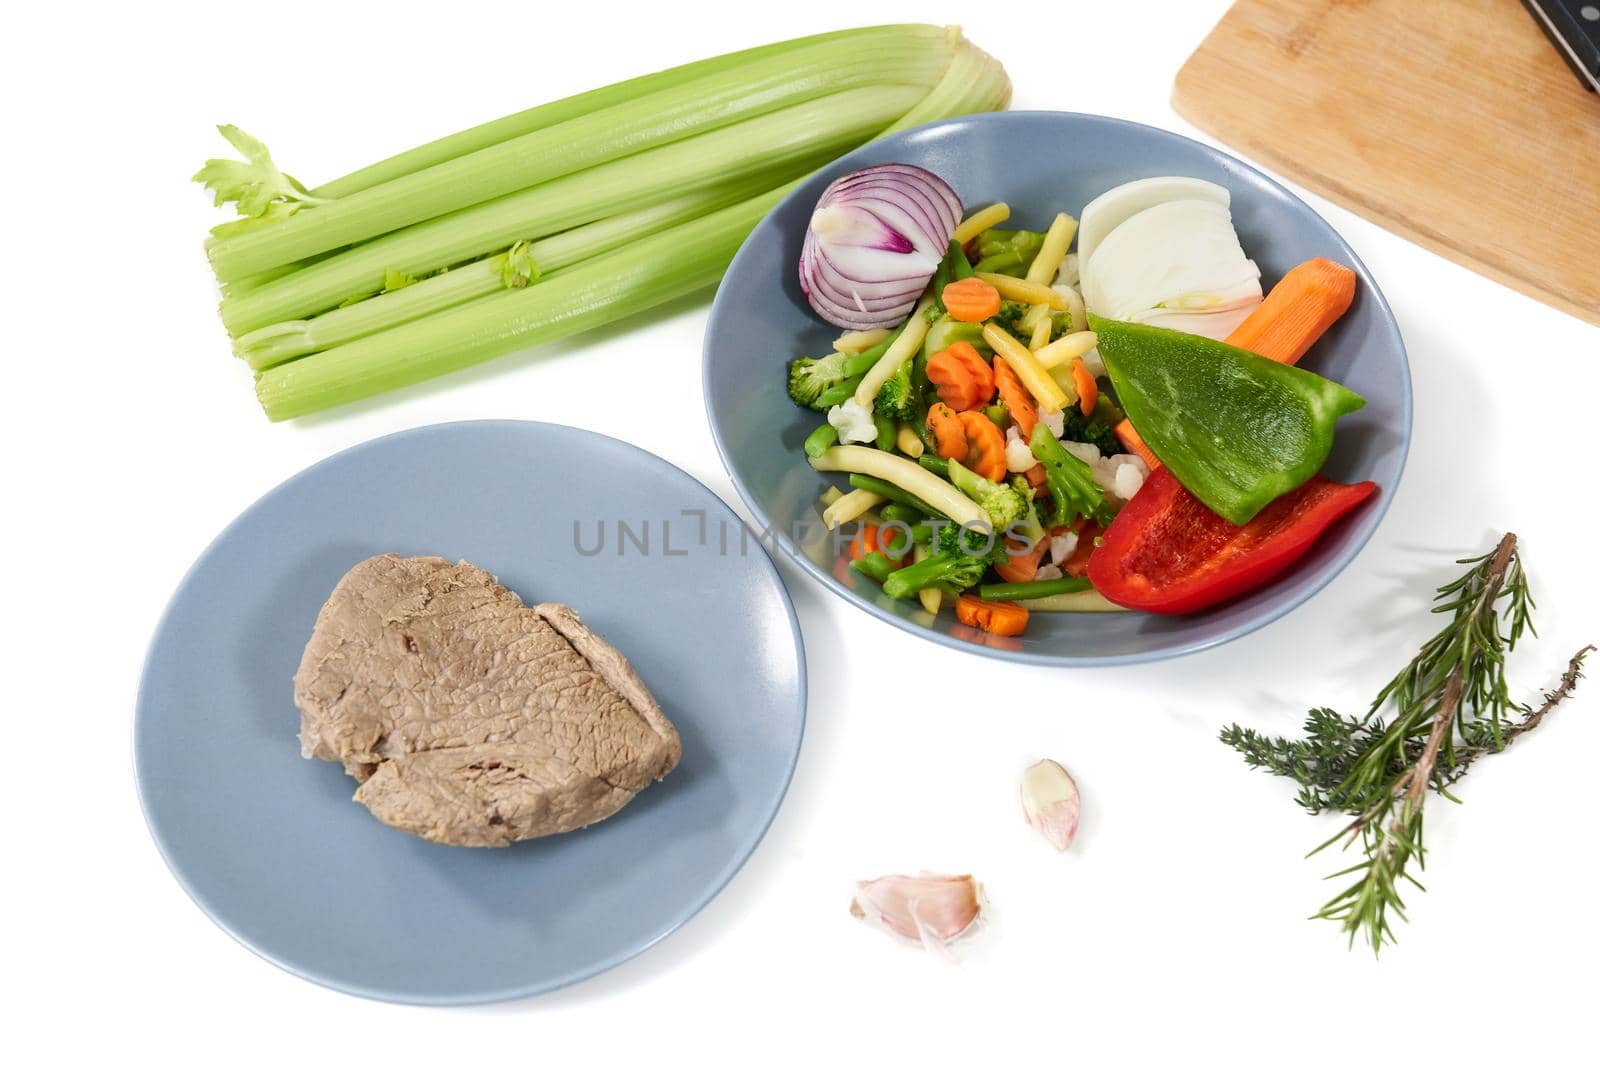 Top view of delicious boiled meat and different vegetables on table for tasty dish. Concept of cooking yummy meal with healthy ingredients garlic,rosemary,celery,colorful vegetables. 